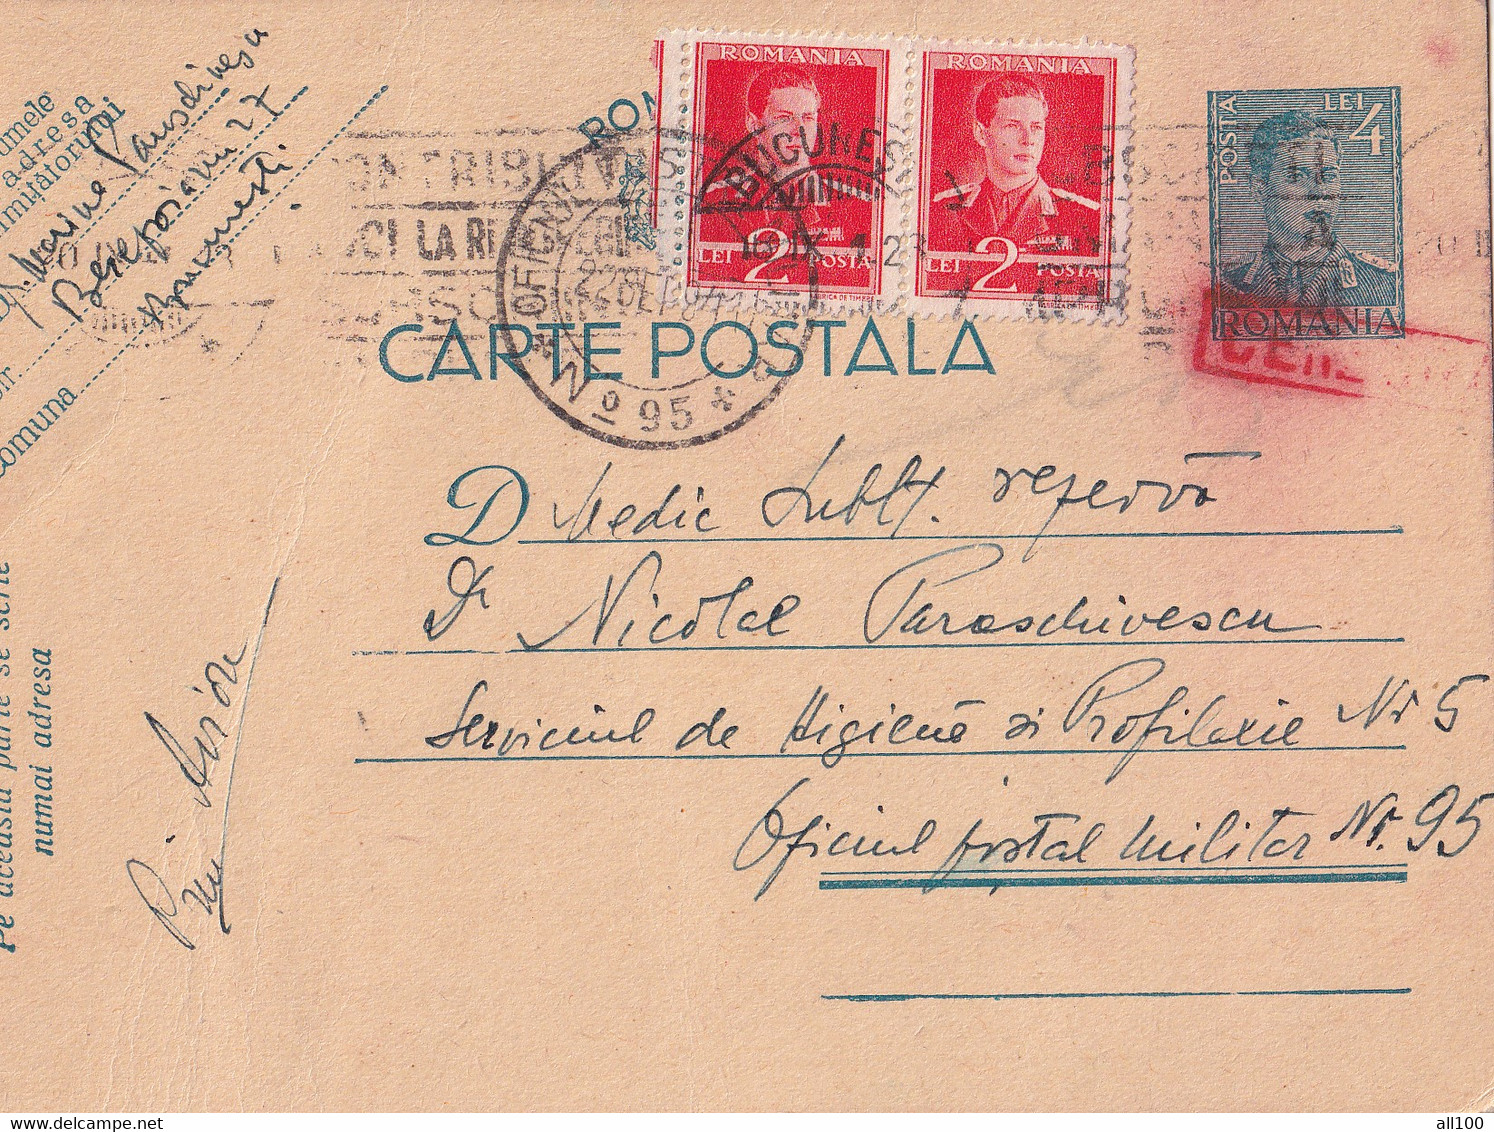 A16438 - MILITARY LETTER POSTAL STATIONERY KING MICHAEL 4 LEI CENZURAT USED 1942 OFICIUL MILITAR 95 - 2. Weltkrieg (Briefe)